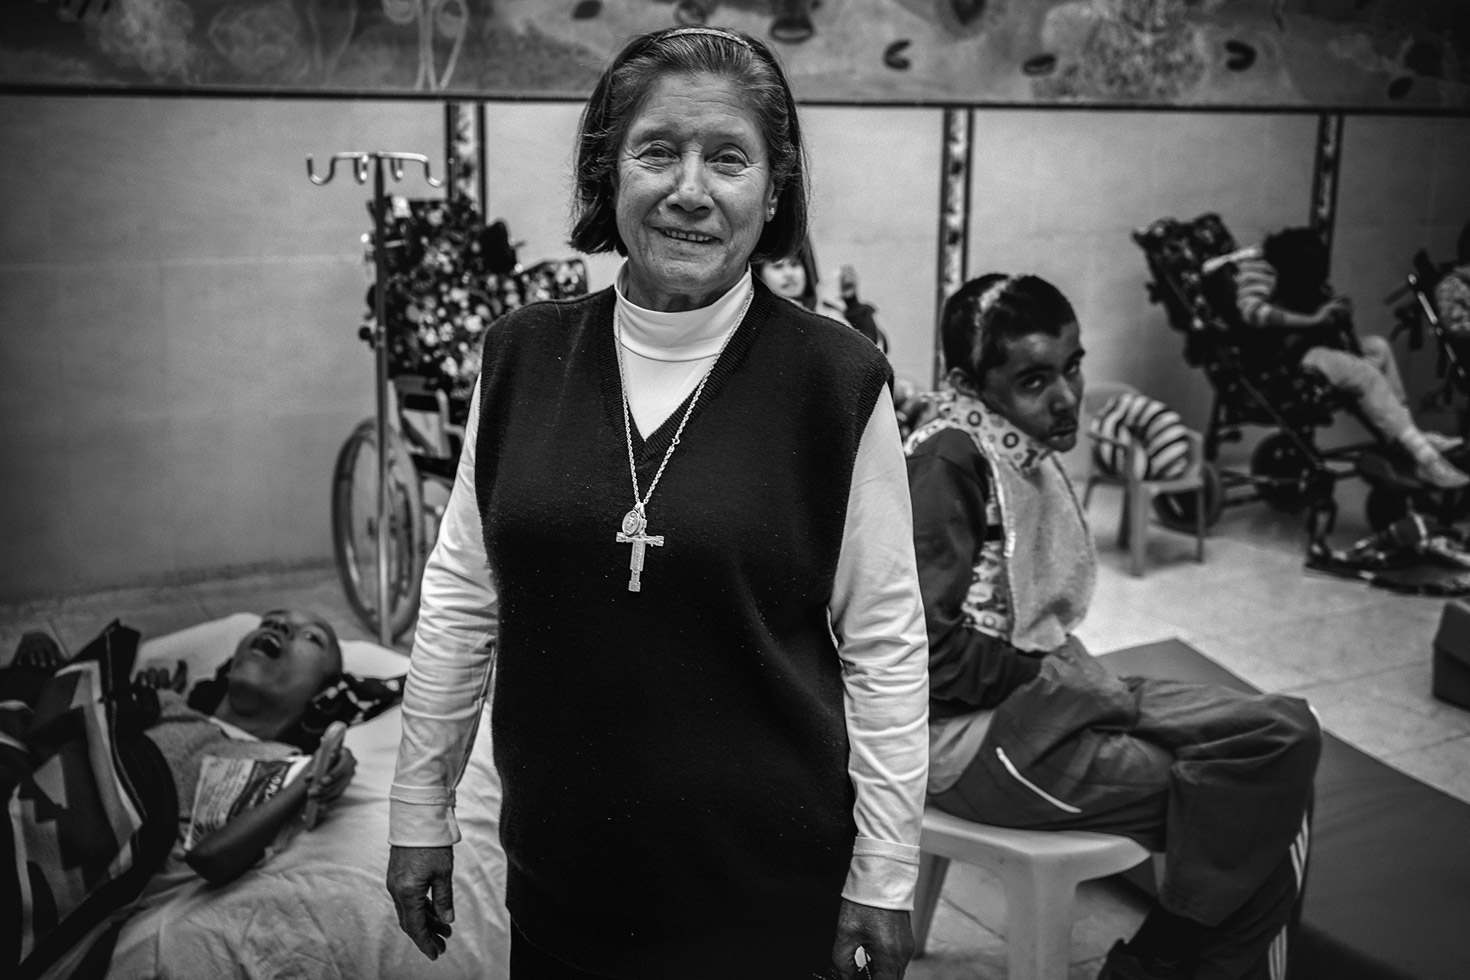 Sister Valeriana who founded a permanent home in Bogotá, 'Luz Y Vida,' for 180 severely handicapped children, in 1991.

Colombia.